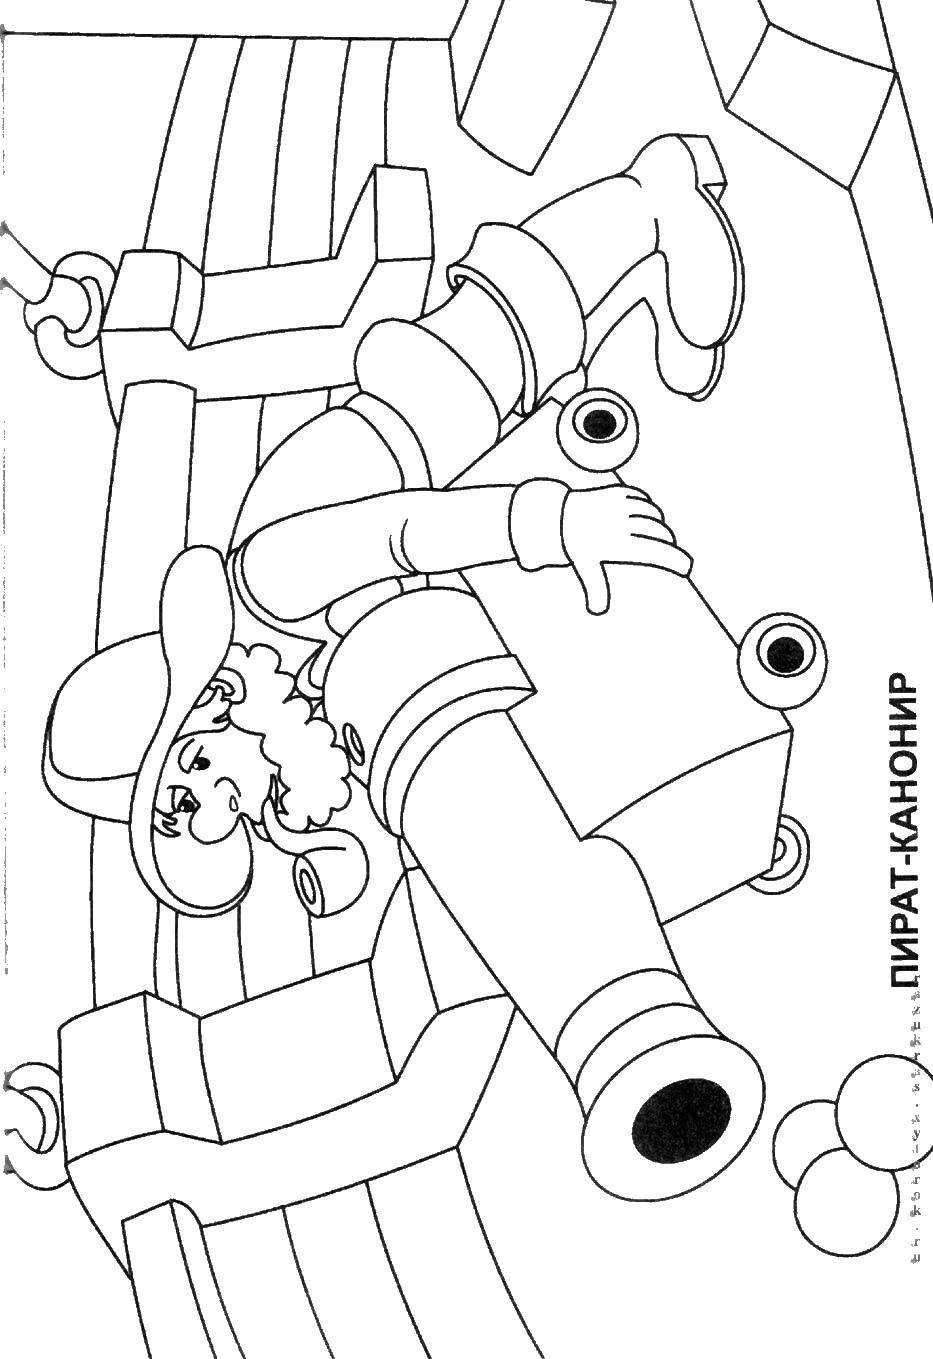 Coloring Pirate gunner. Category The pirates. Tags:  Pirate, ship, gun.